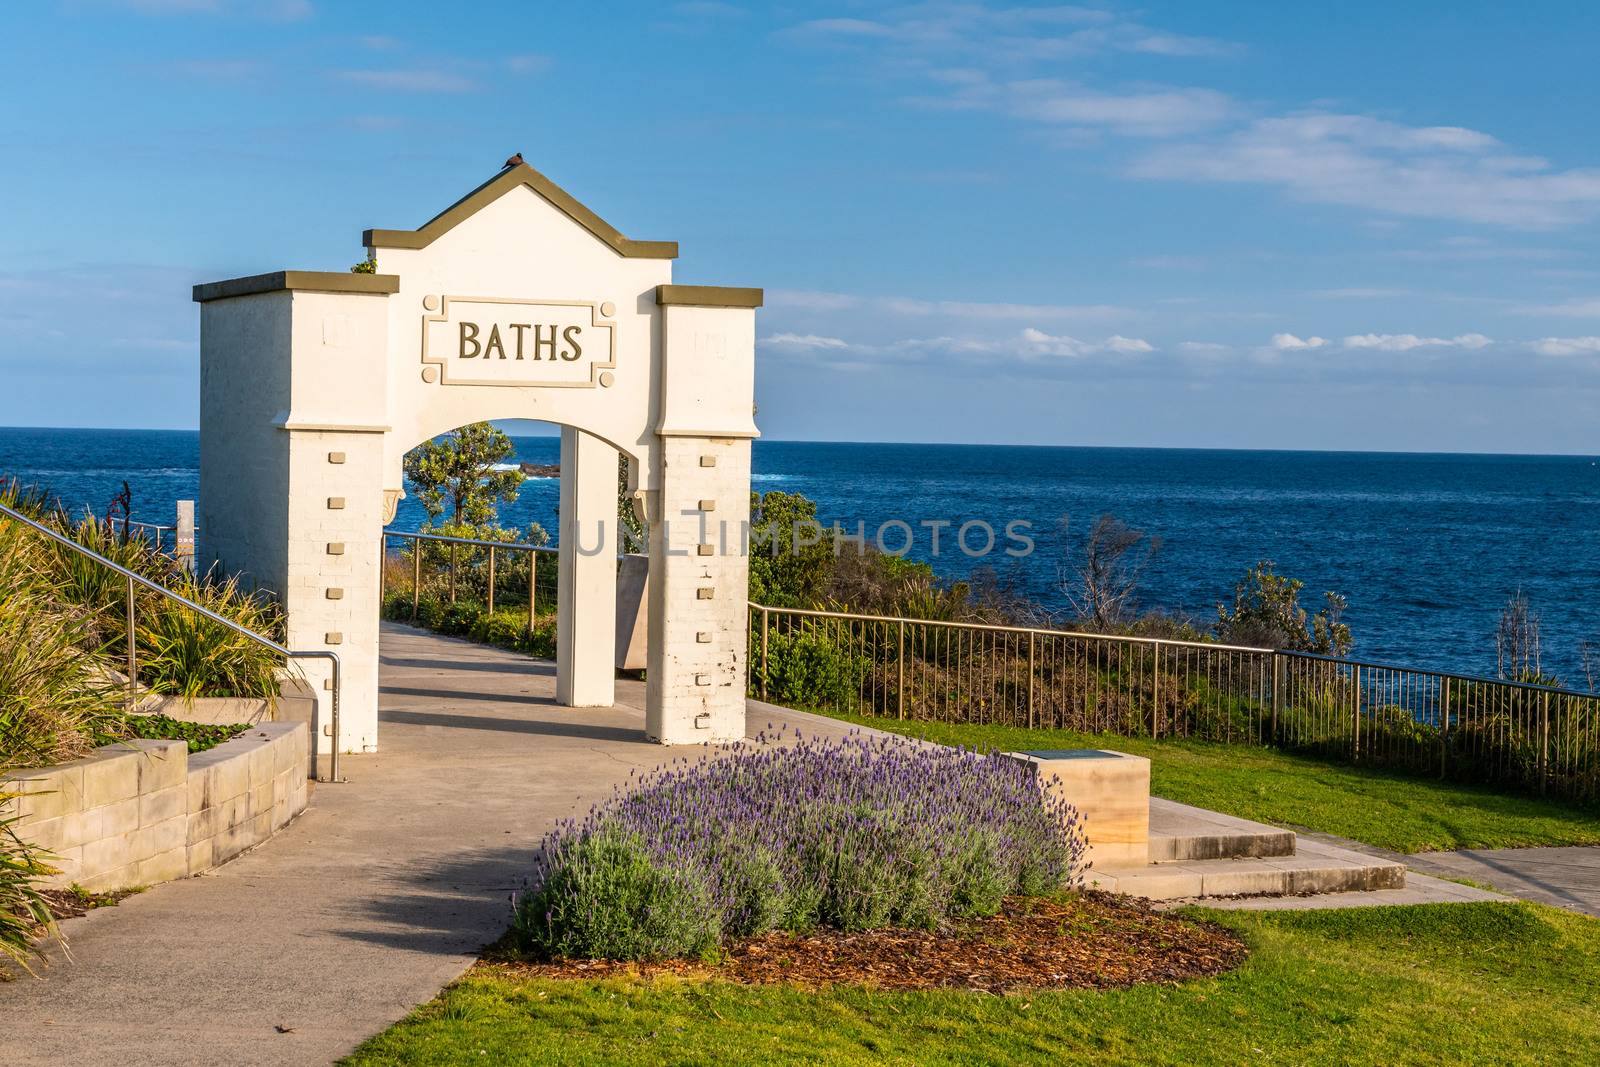 Entrance of Coogee baths in late afternoon light, Sydney, NSW Australia.